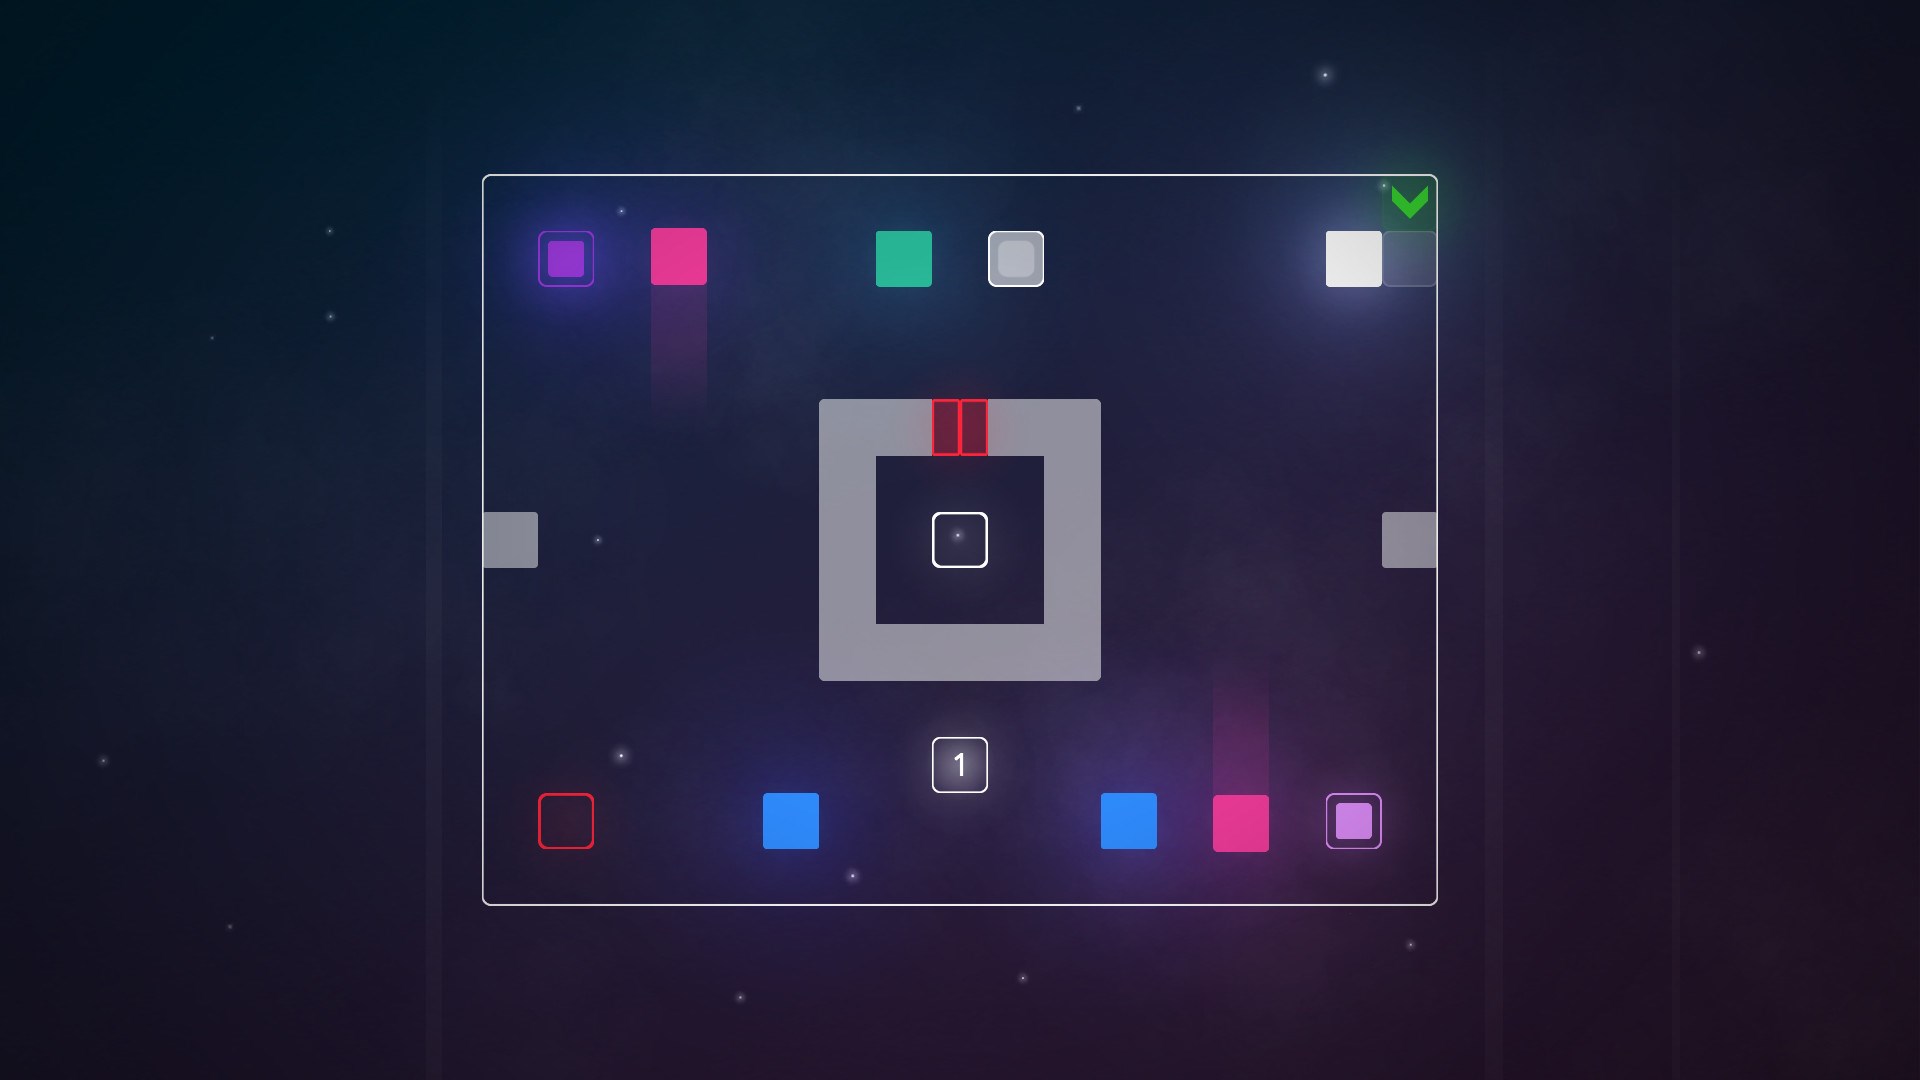 Functional Neurons - A Puzzle Game